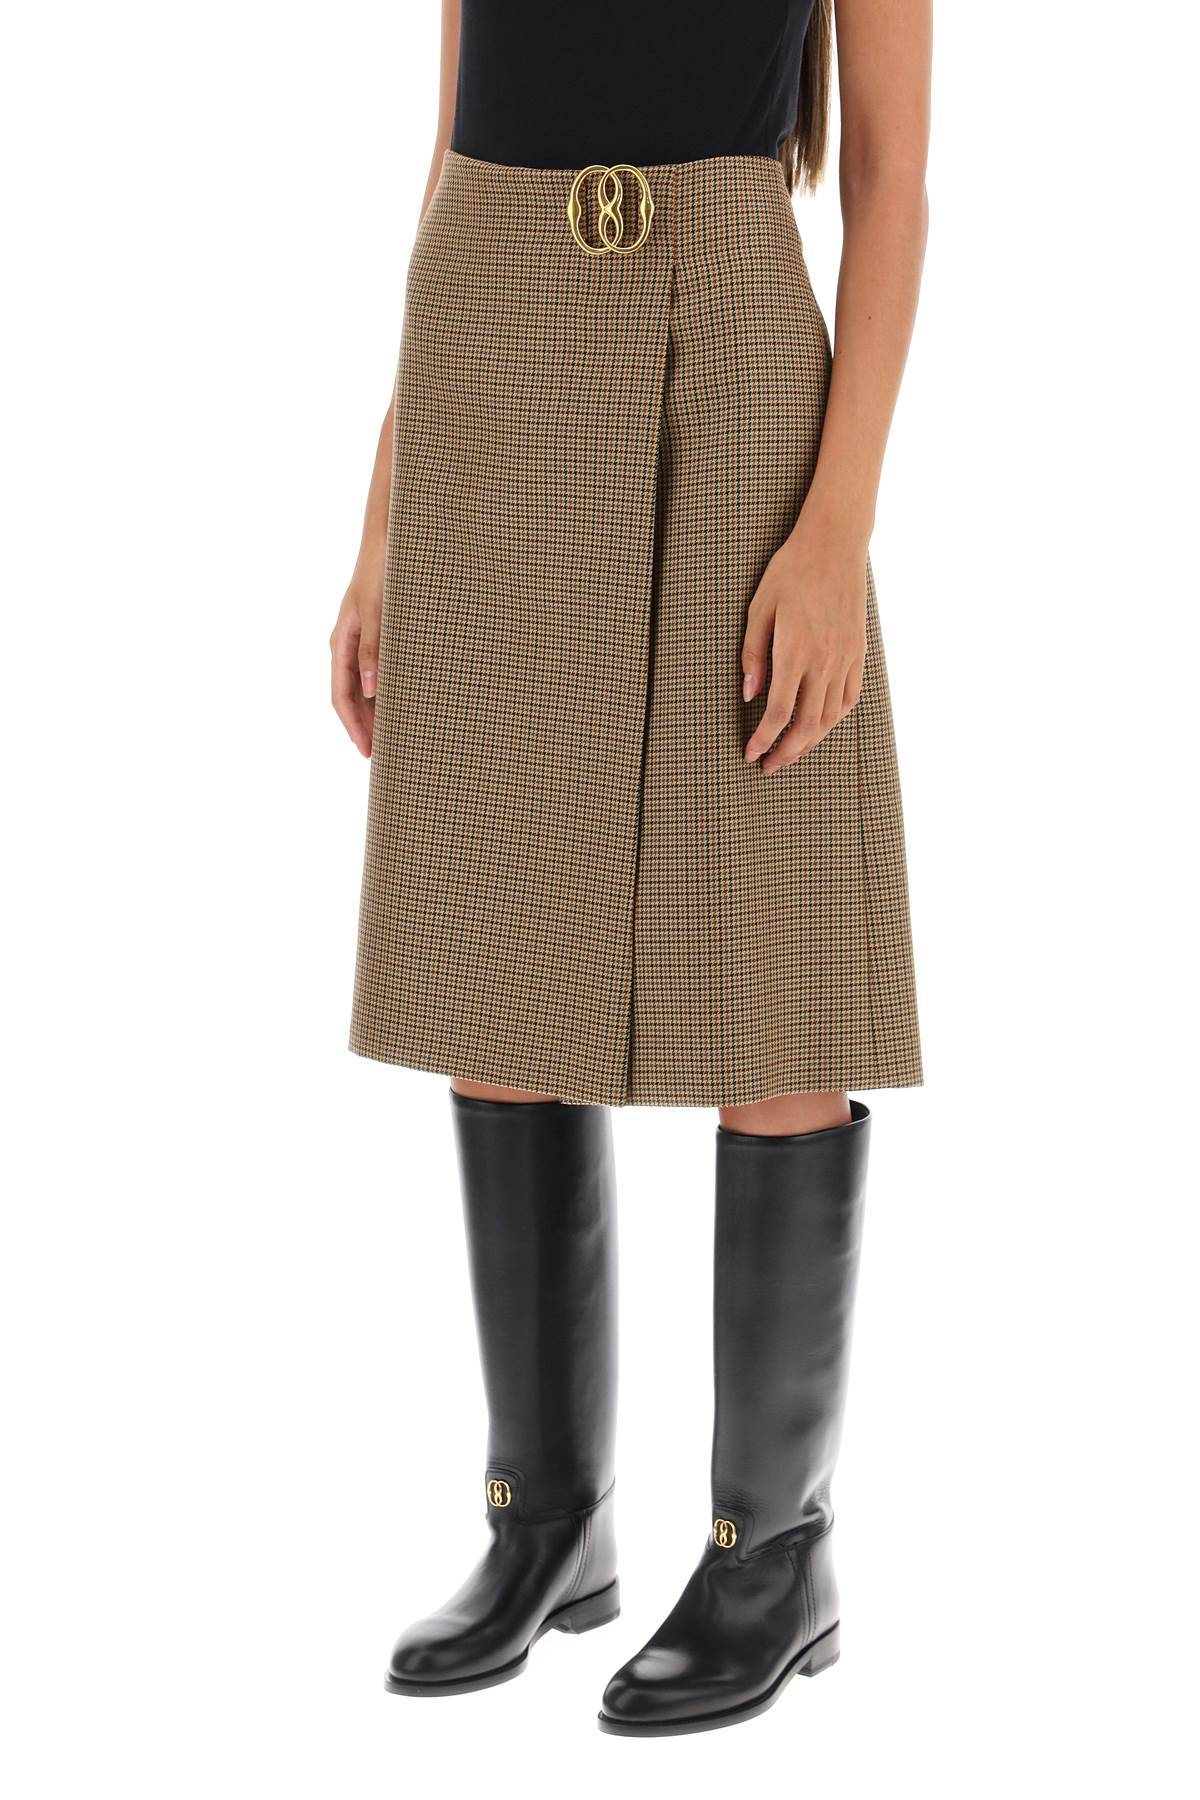 Shop Bally Houndstooth A-line Skirt With Emblem Buckle In Beige